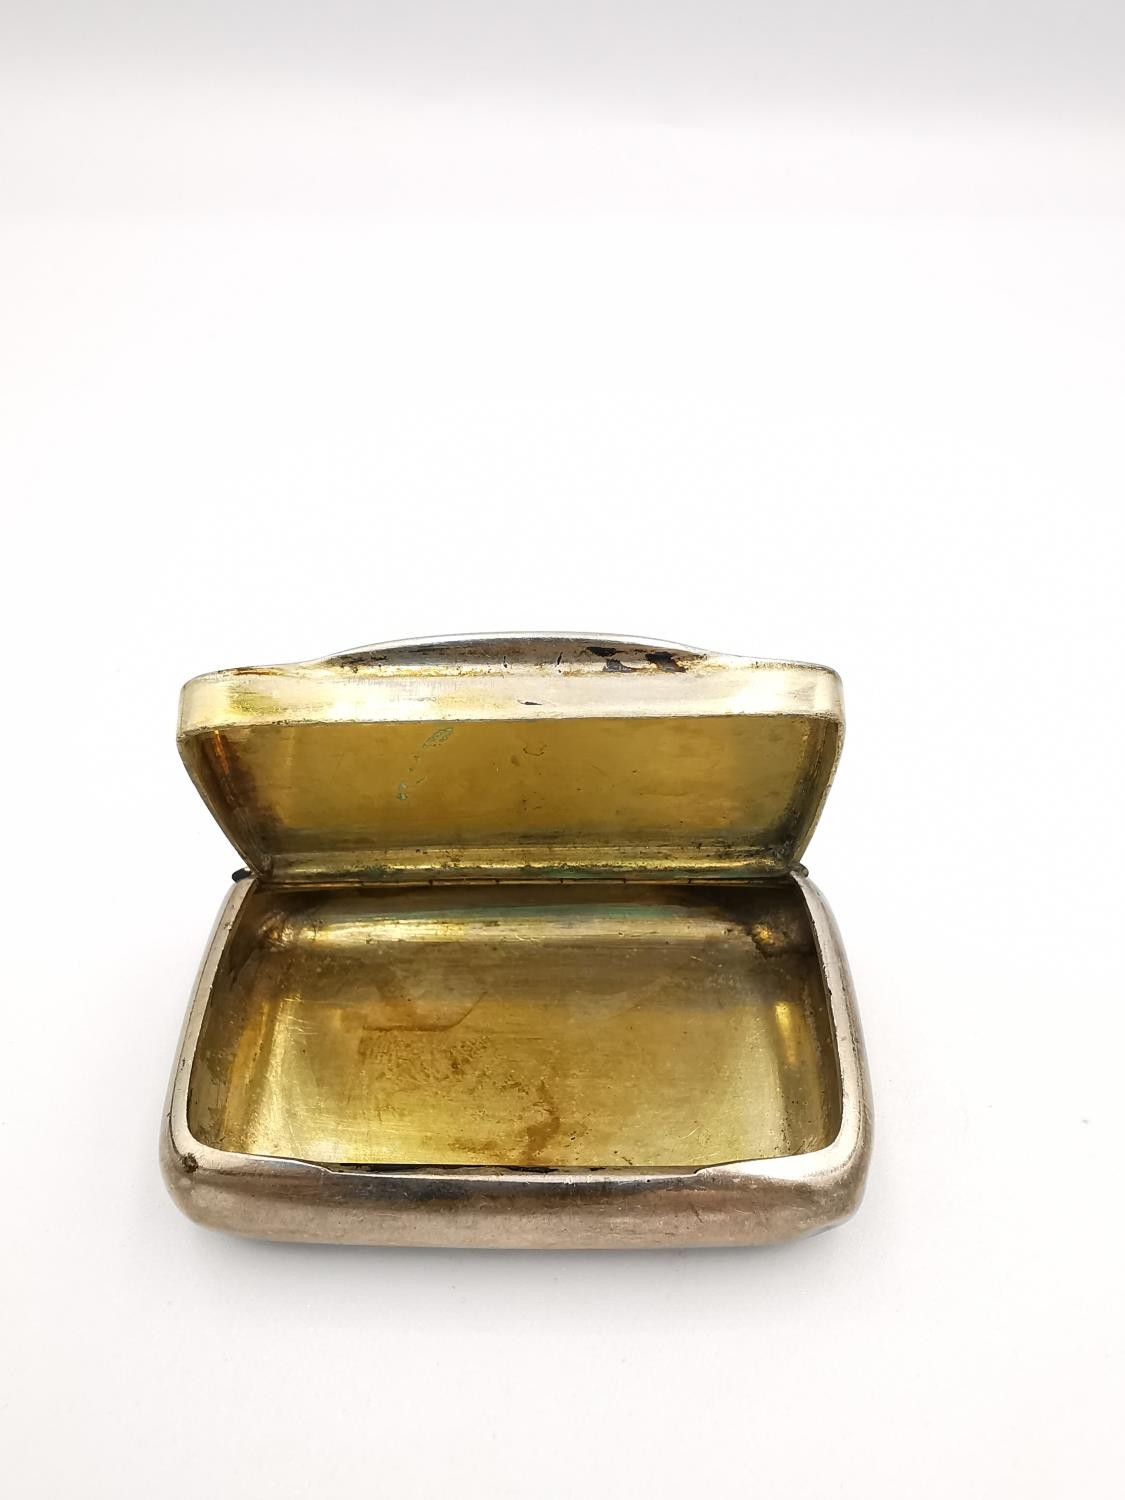 A Dutch 835 silver Lodderein box along with a German silver snuff box with gilded interior by - Image 6 of 8